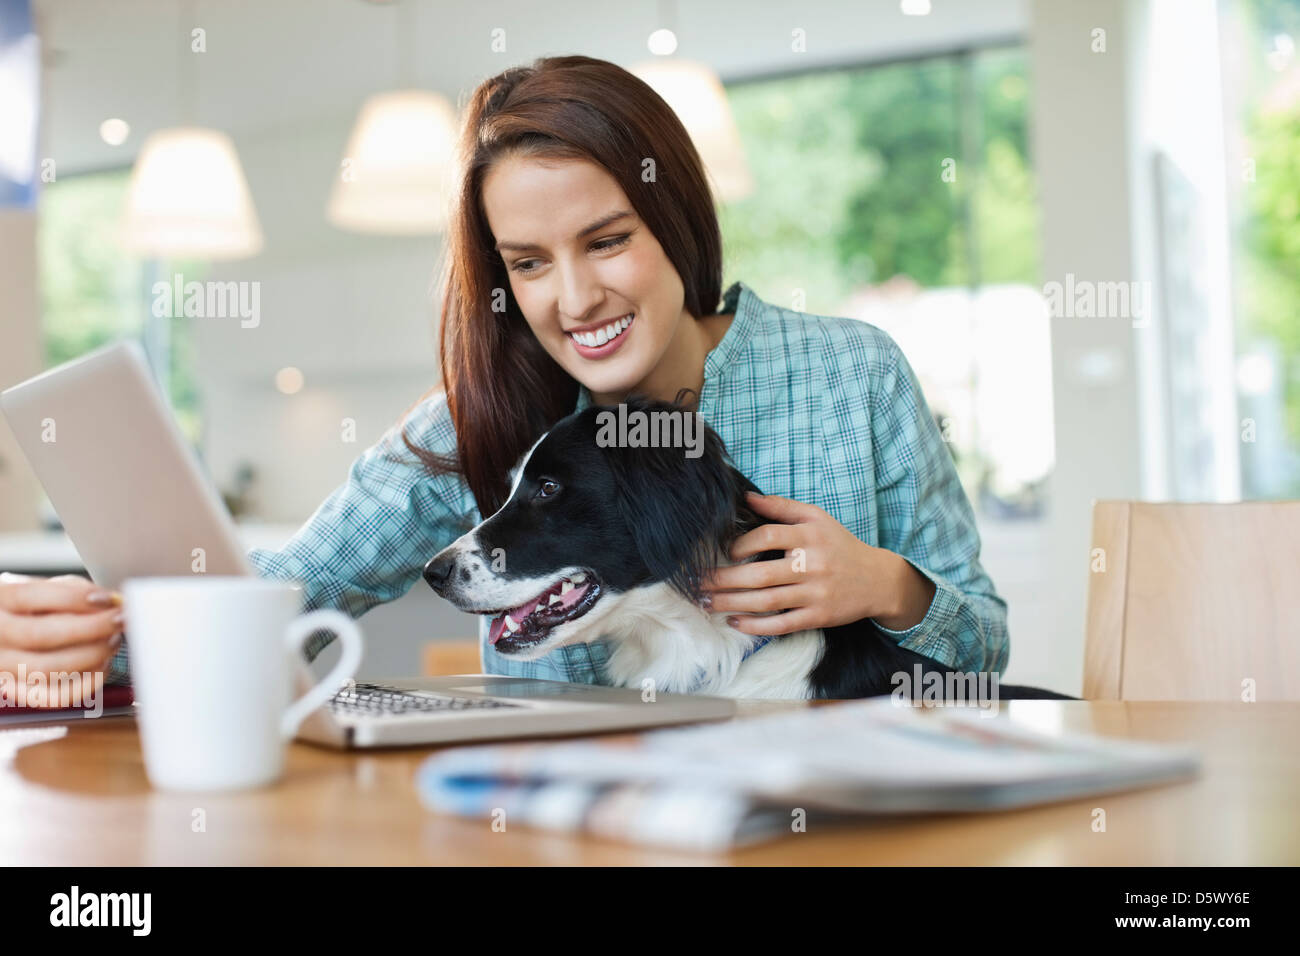 Woman with dog on lap using laptop Stock Photo